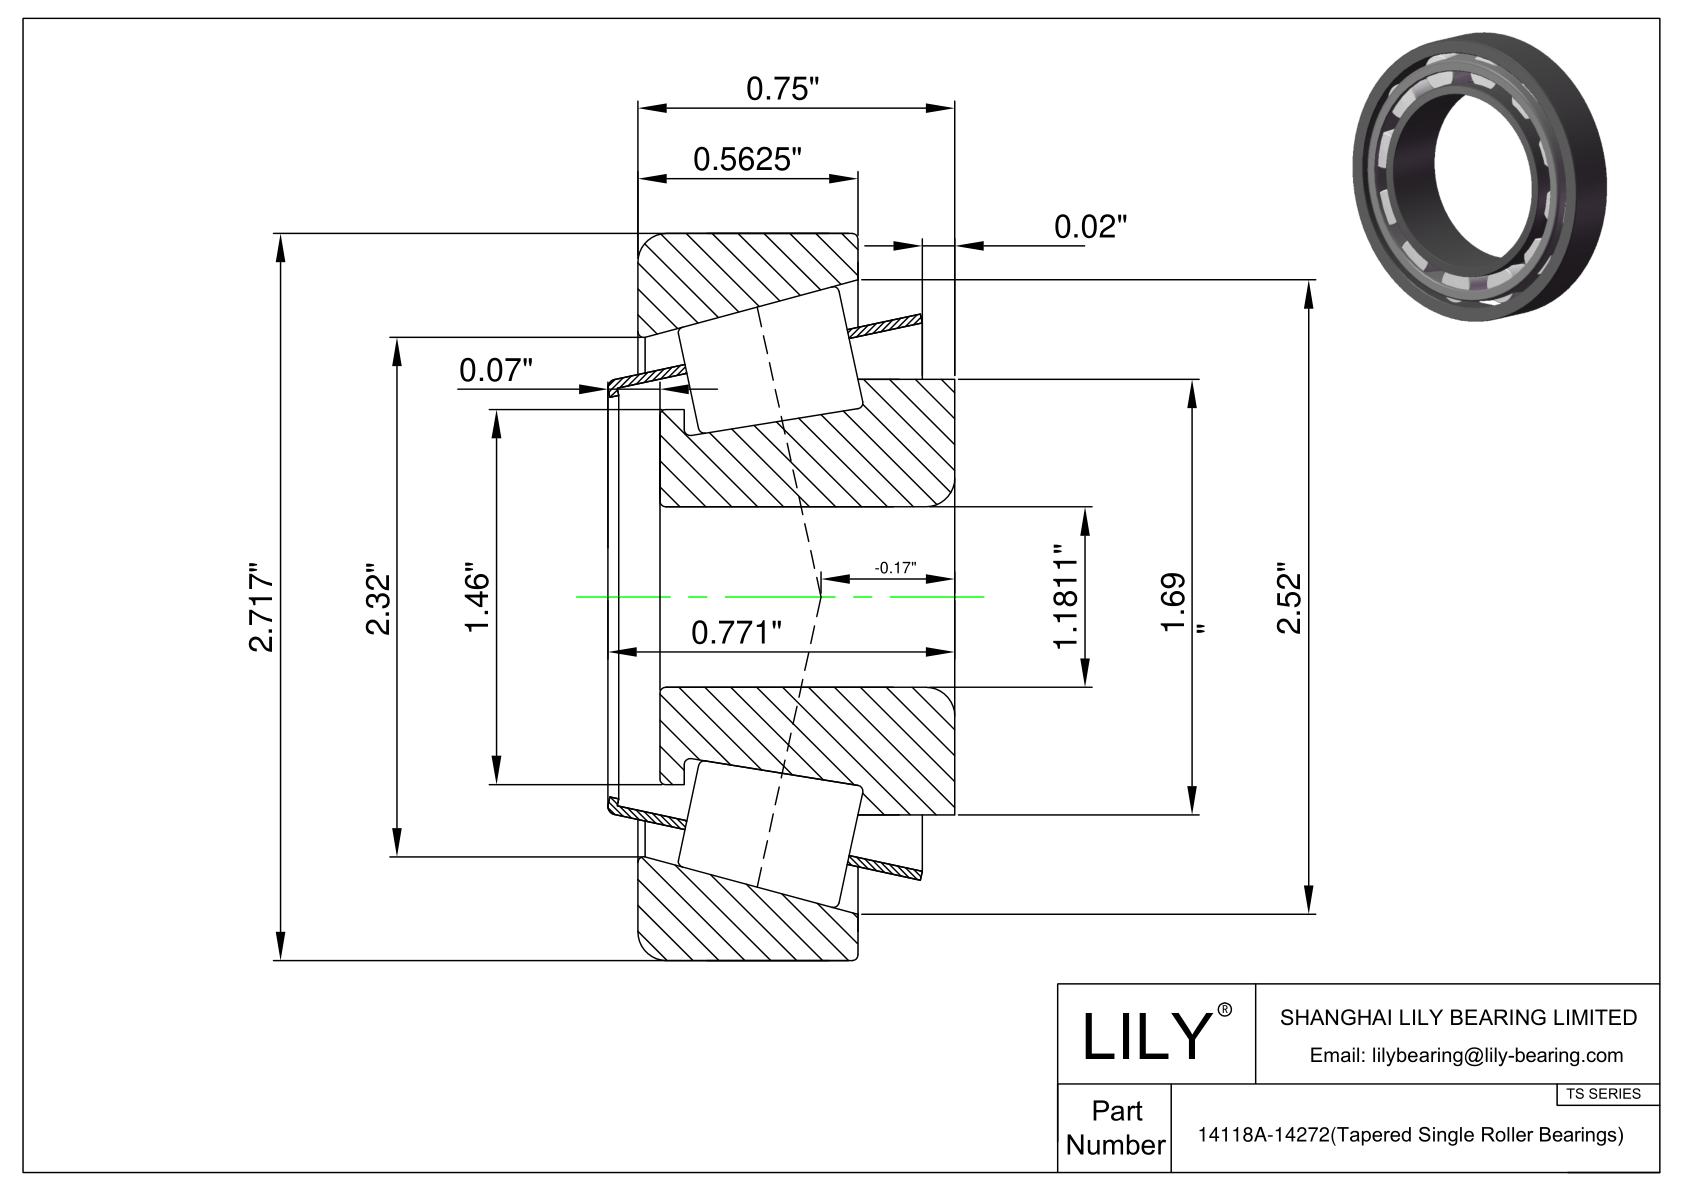 14118A-14272 TS (Tapered Single Roller Bearings) (Imperial) cad drawing